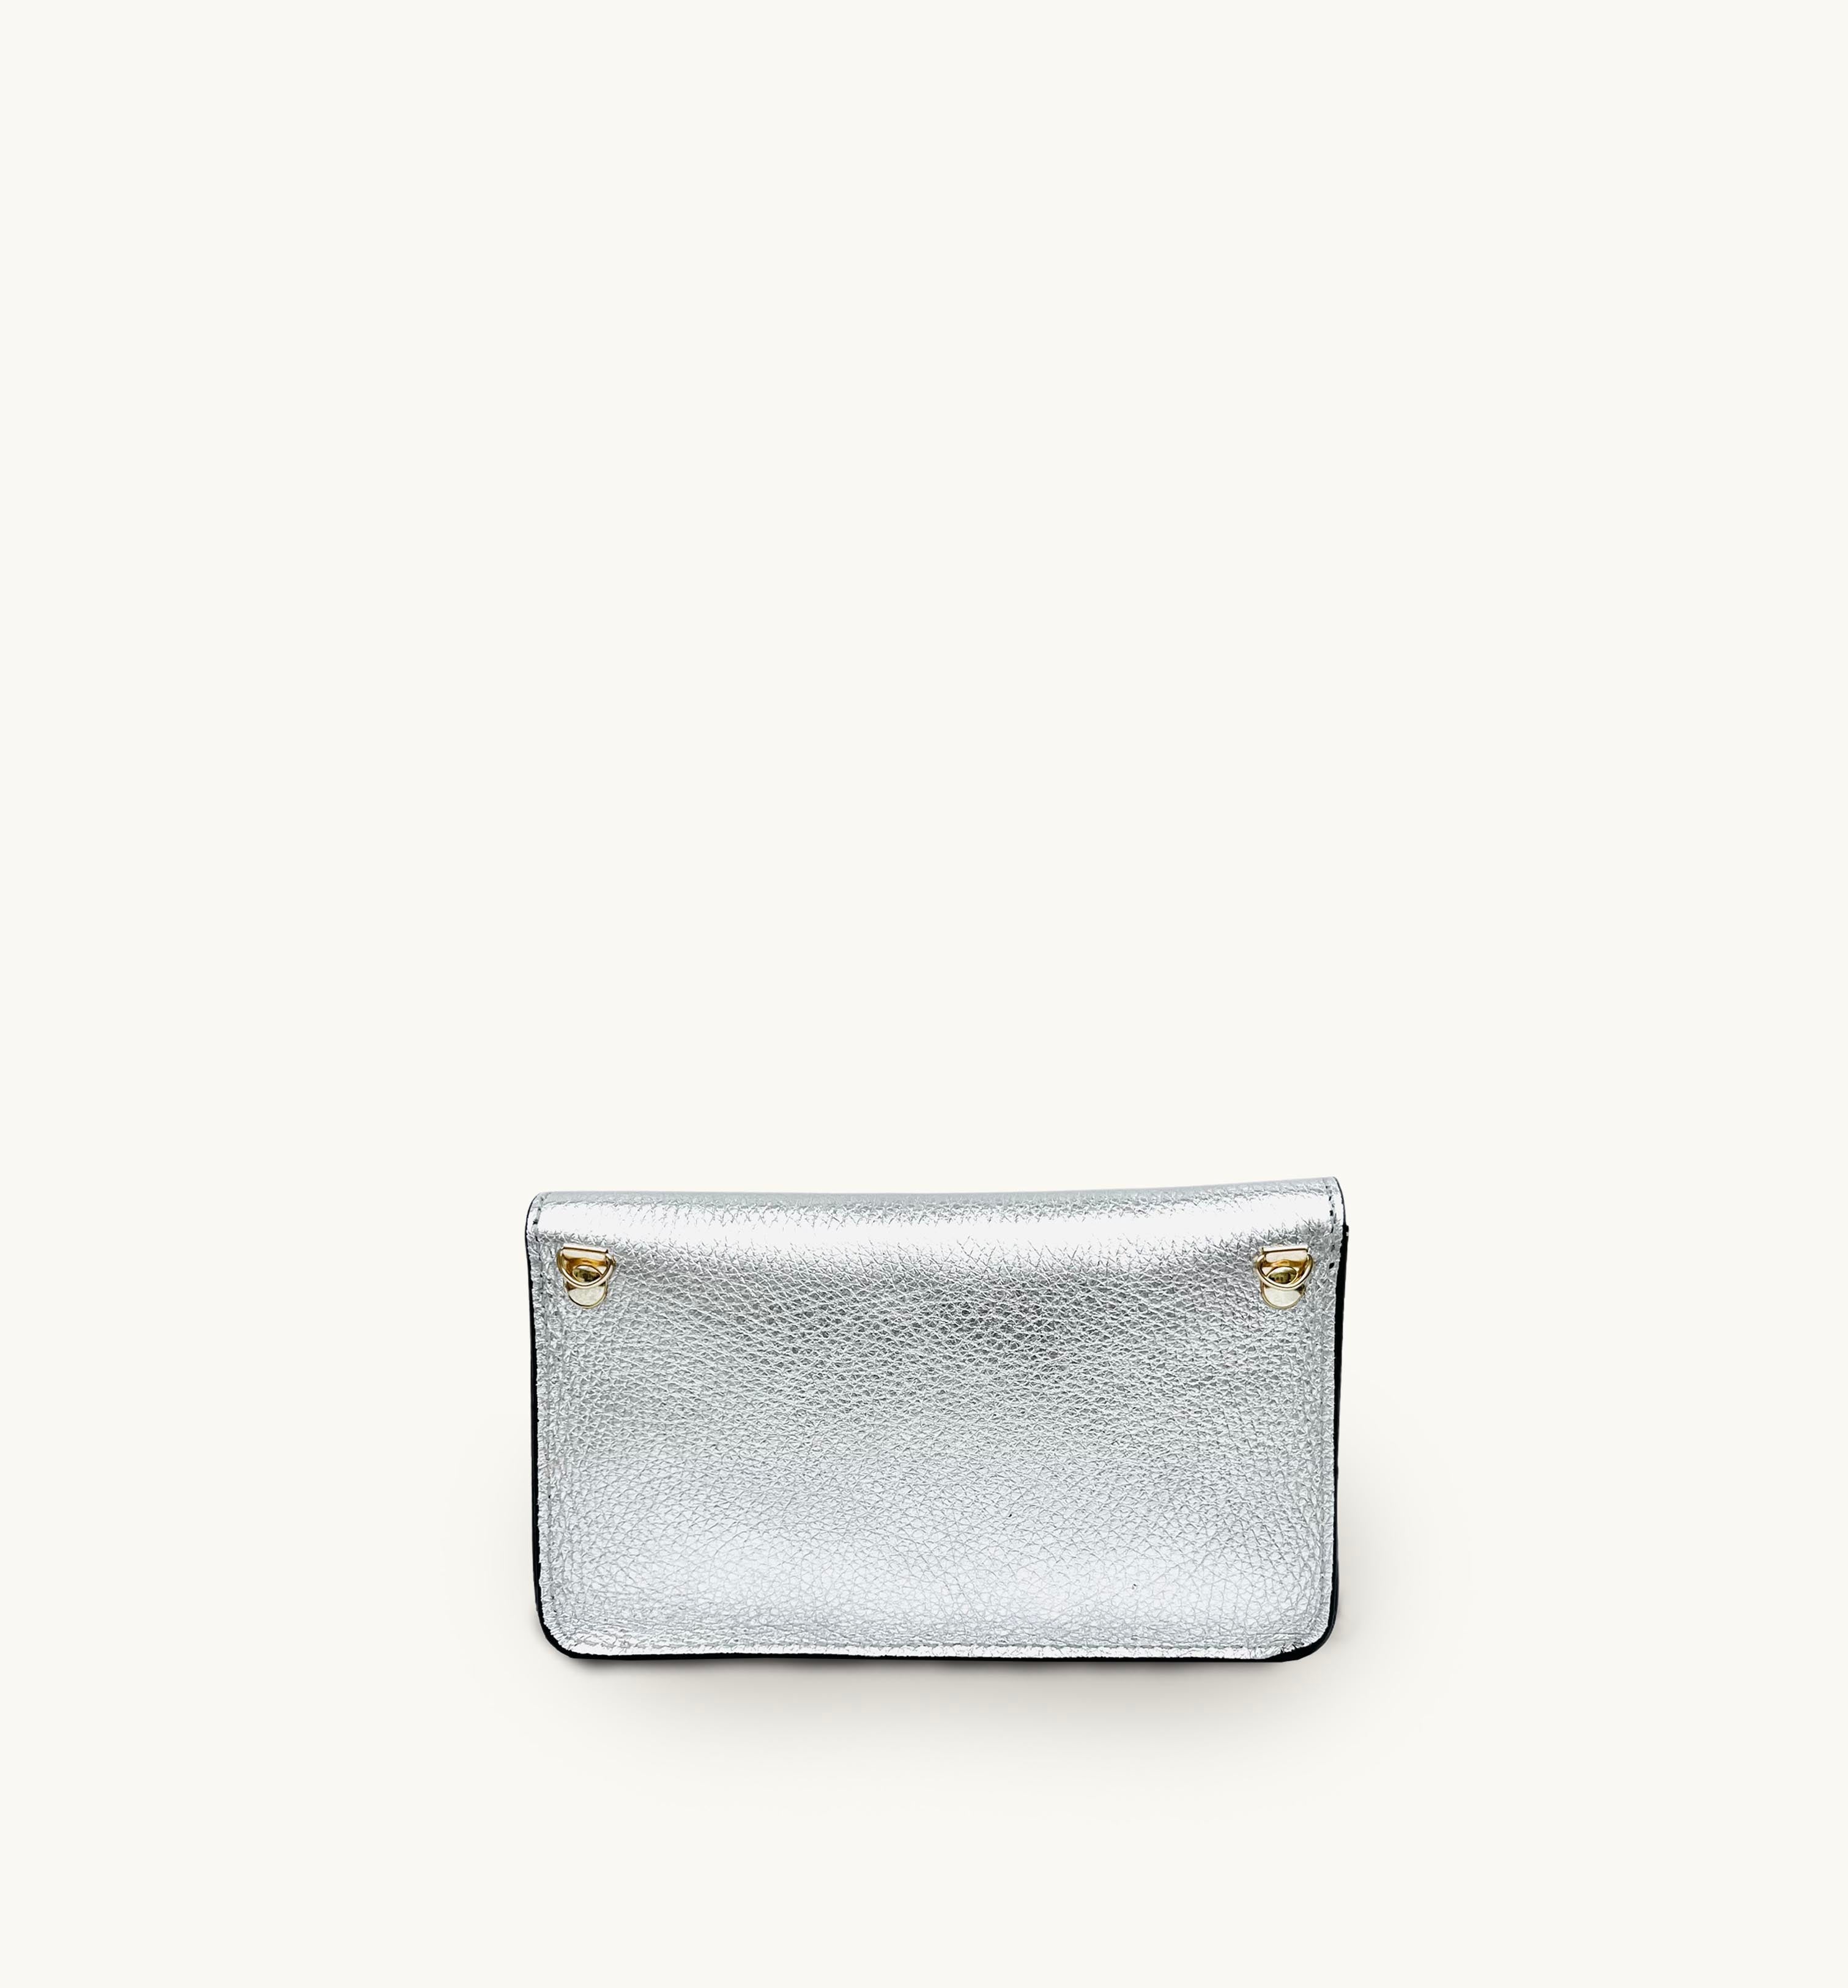 The Mila Silver Leather Phone Bag